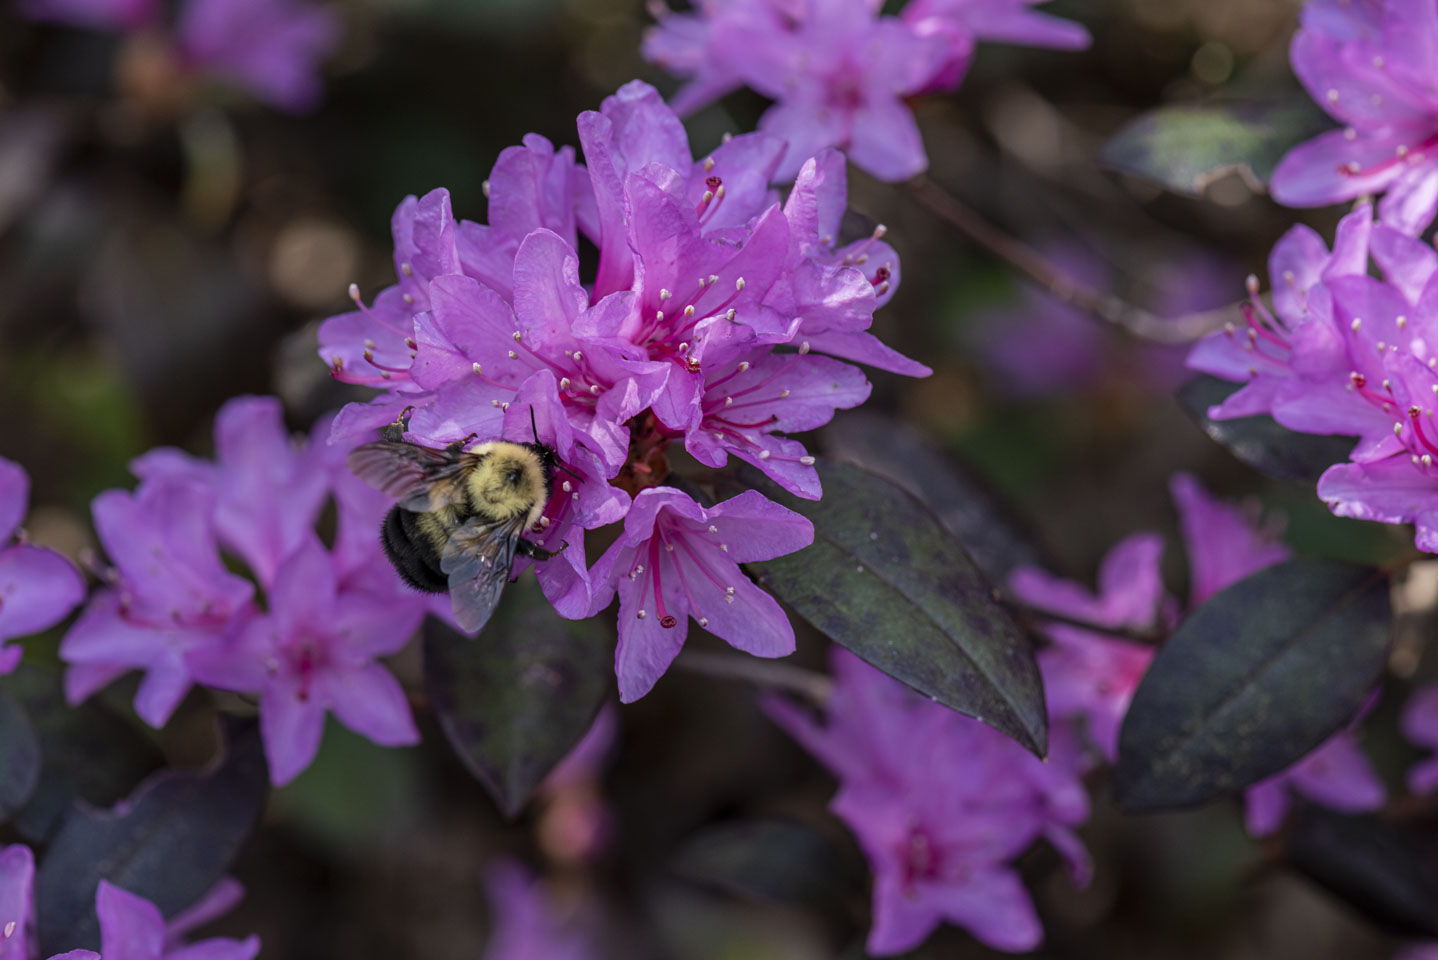 Rhododendrons with a bumble bee